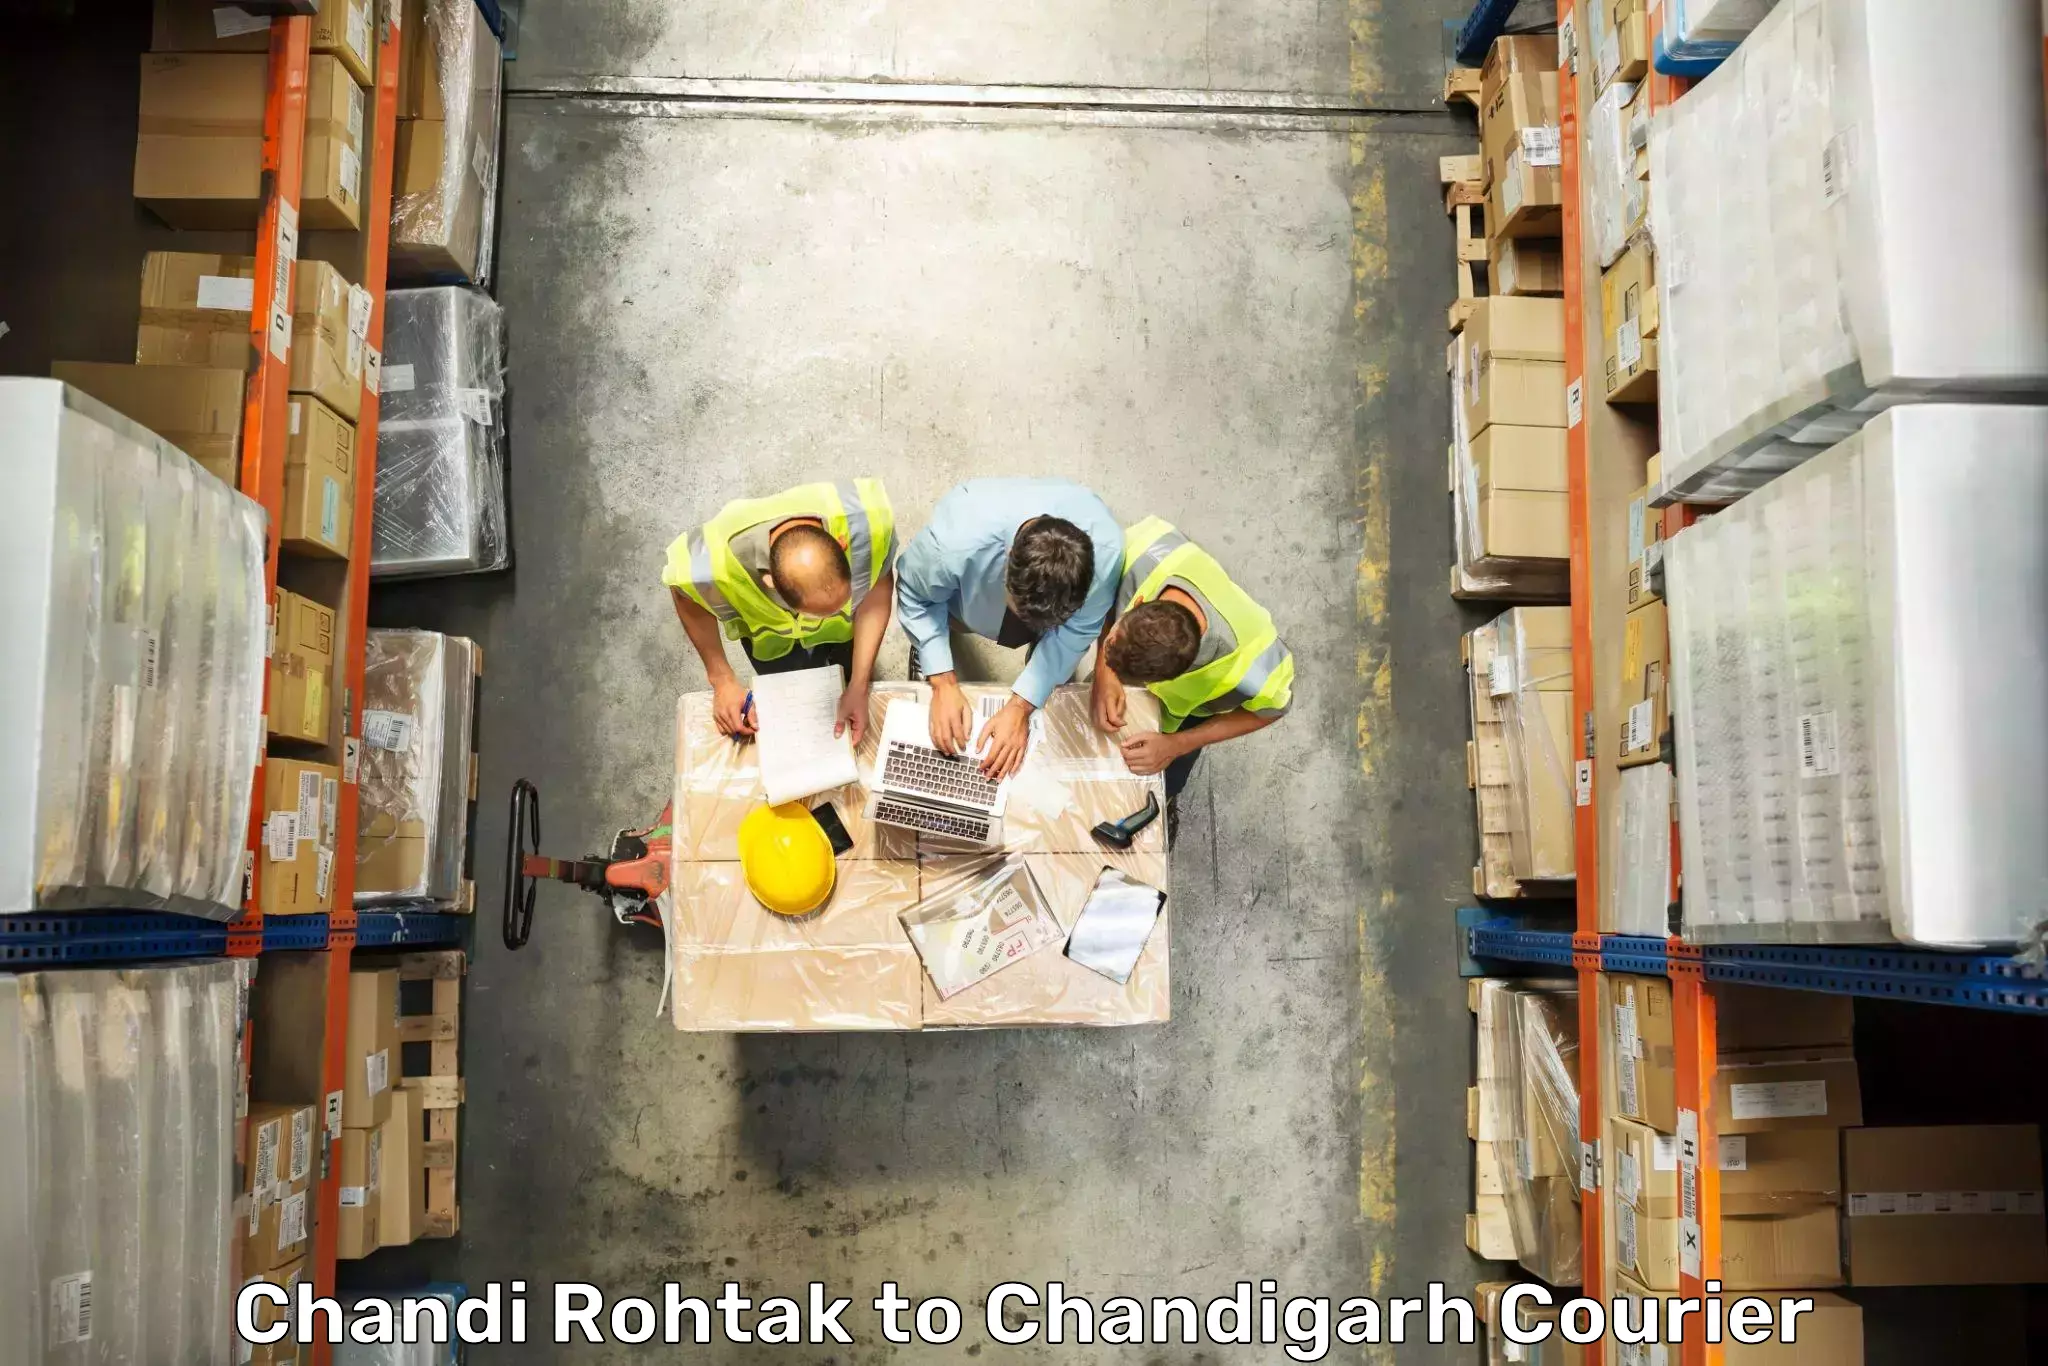 Baggage shipping experience in Chandi Rohtak to Chandigarh